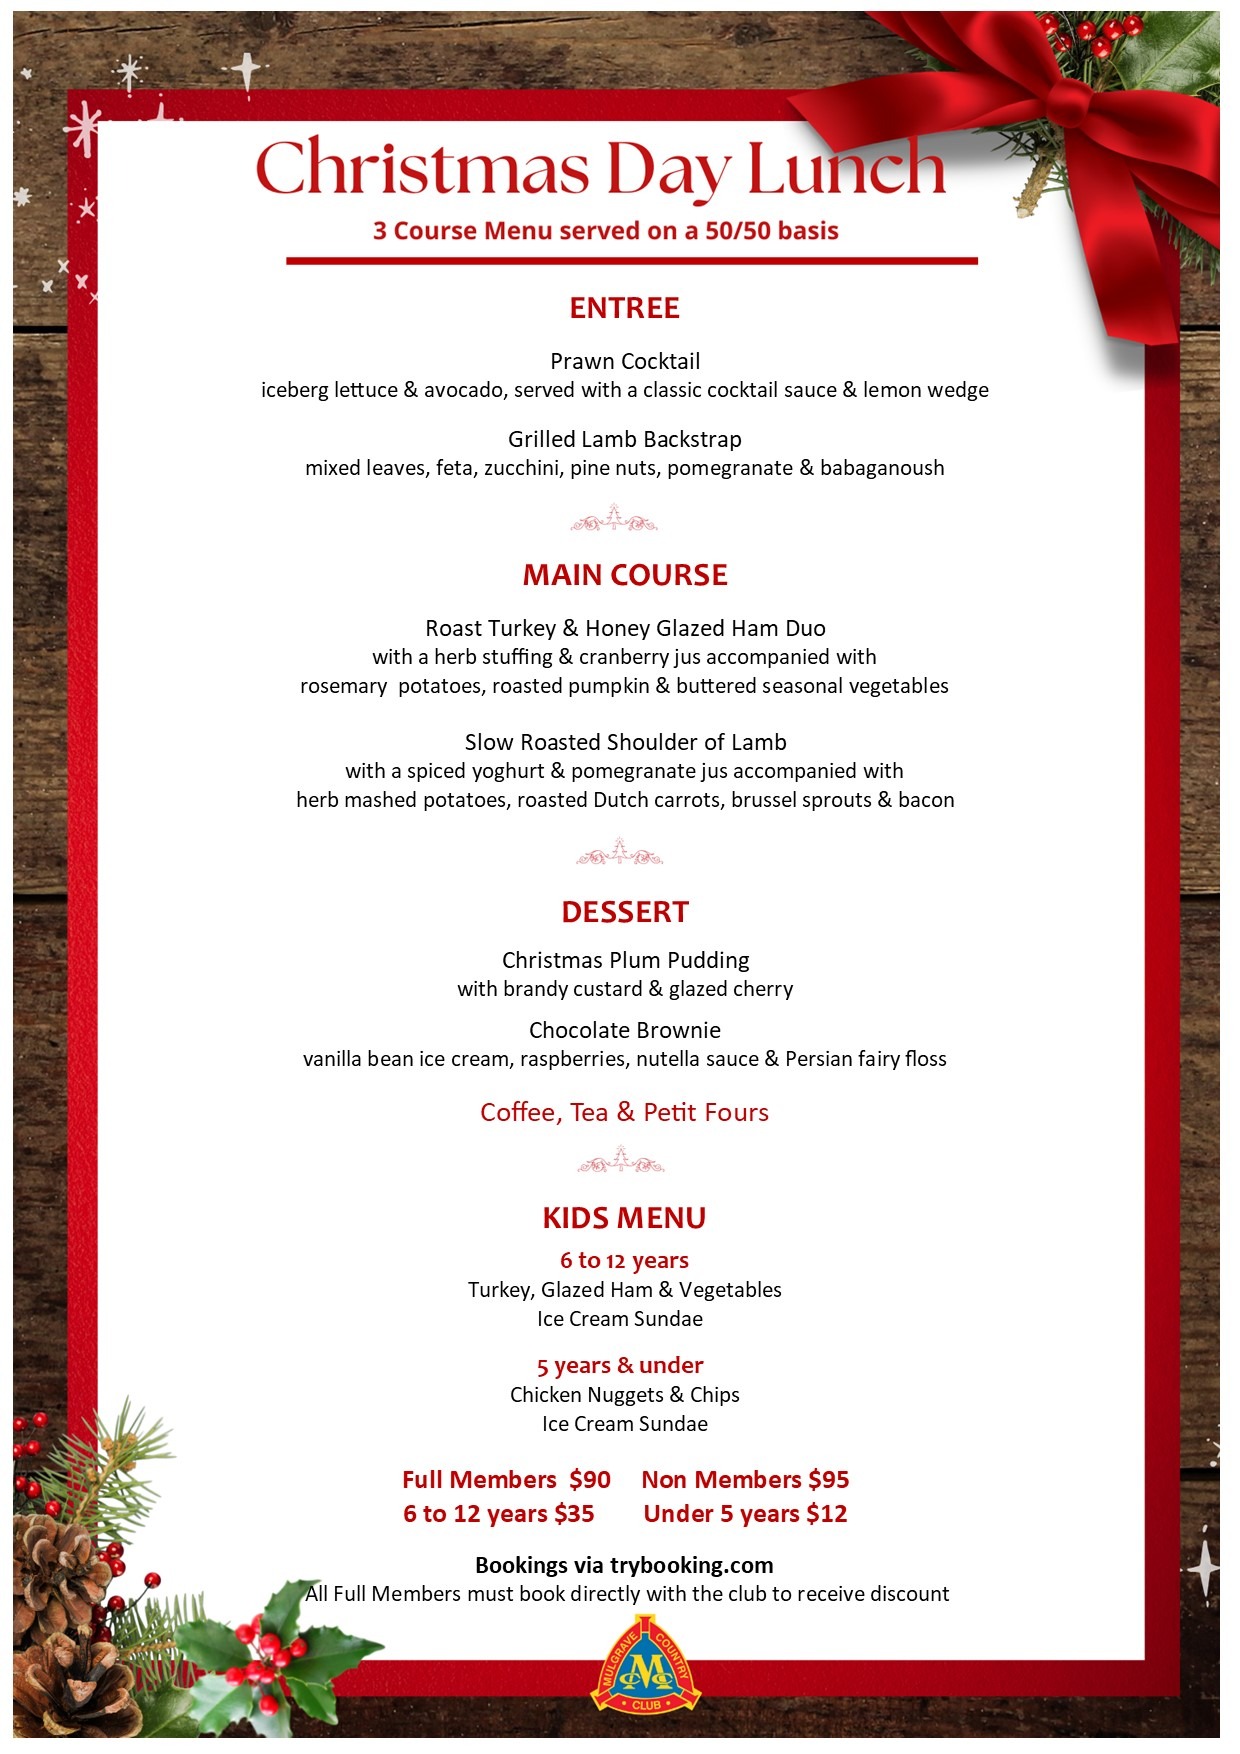 CHRISTMAS DAY LUNCH - MULGRAVE ROOM 2021 Tickets, Mulgrave Country Club ...